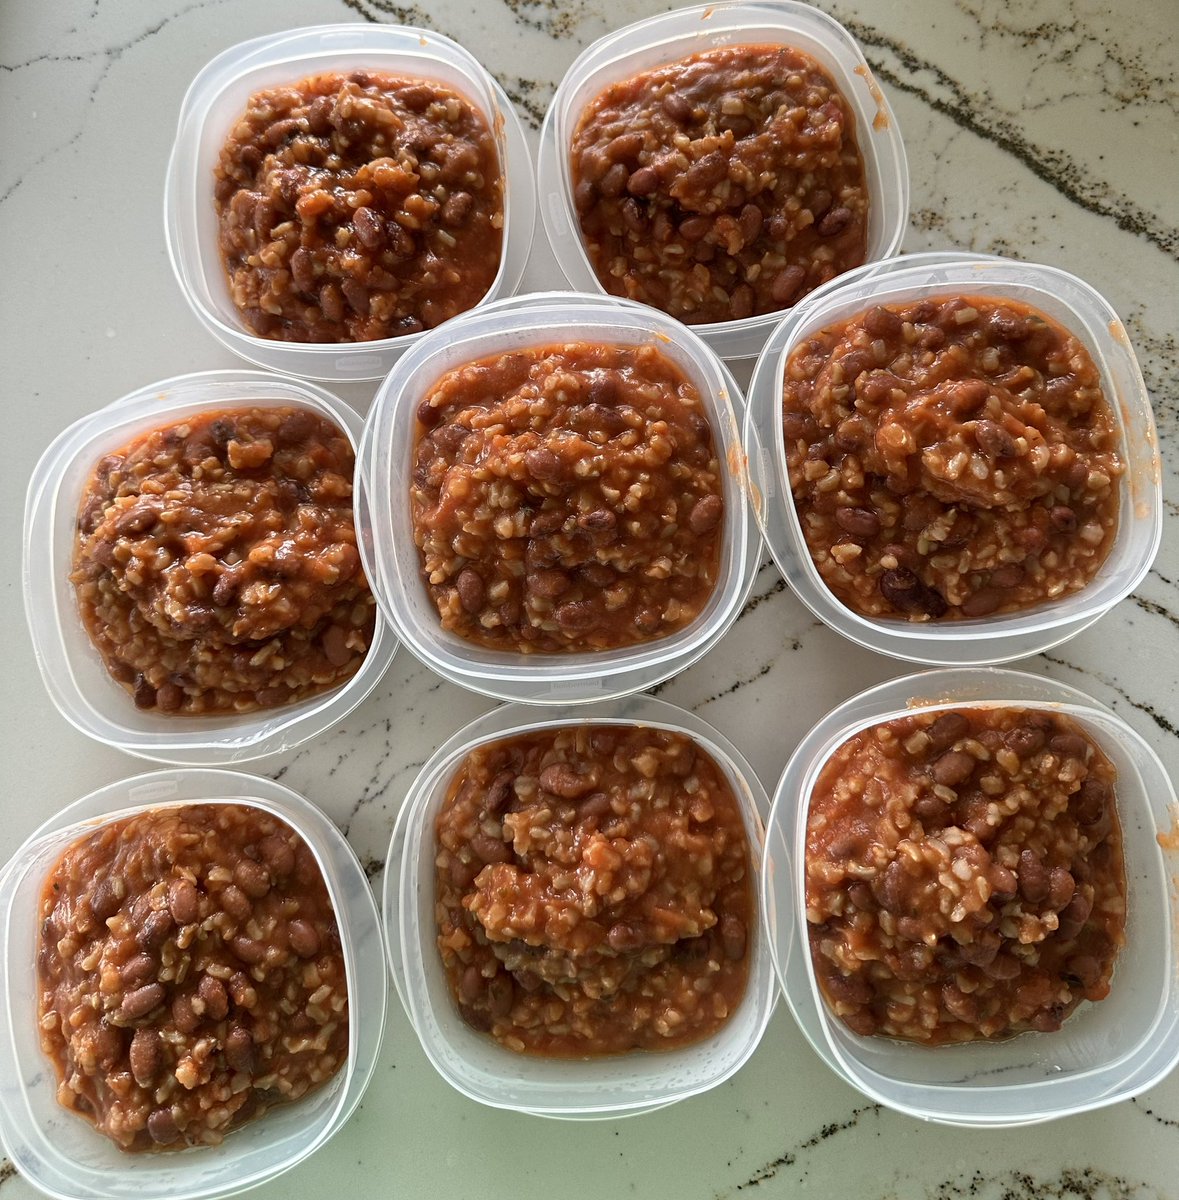 Made 11 servings of bean stew today, from the recipe in my book 😋 Freeze most. Watched the pot carefully as it can boil over. That was fine, I spent more time on @Twitter 🥺😂
#Economical #Nutritious #Delicious #Dietitian 
#AWomanmakesAPlan 📖
 #ItsGreatToBe75 💪👩‍🎓